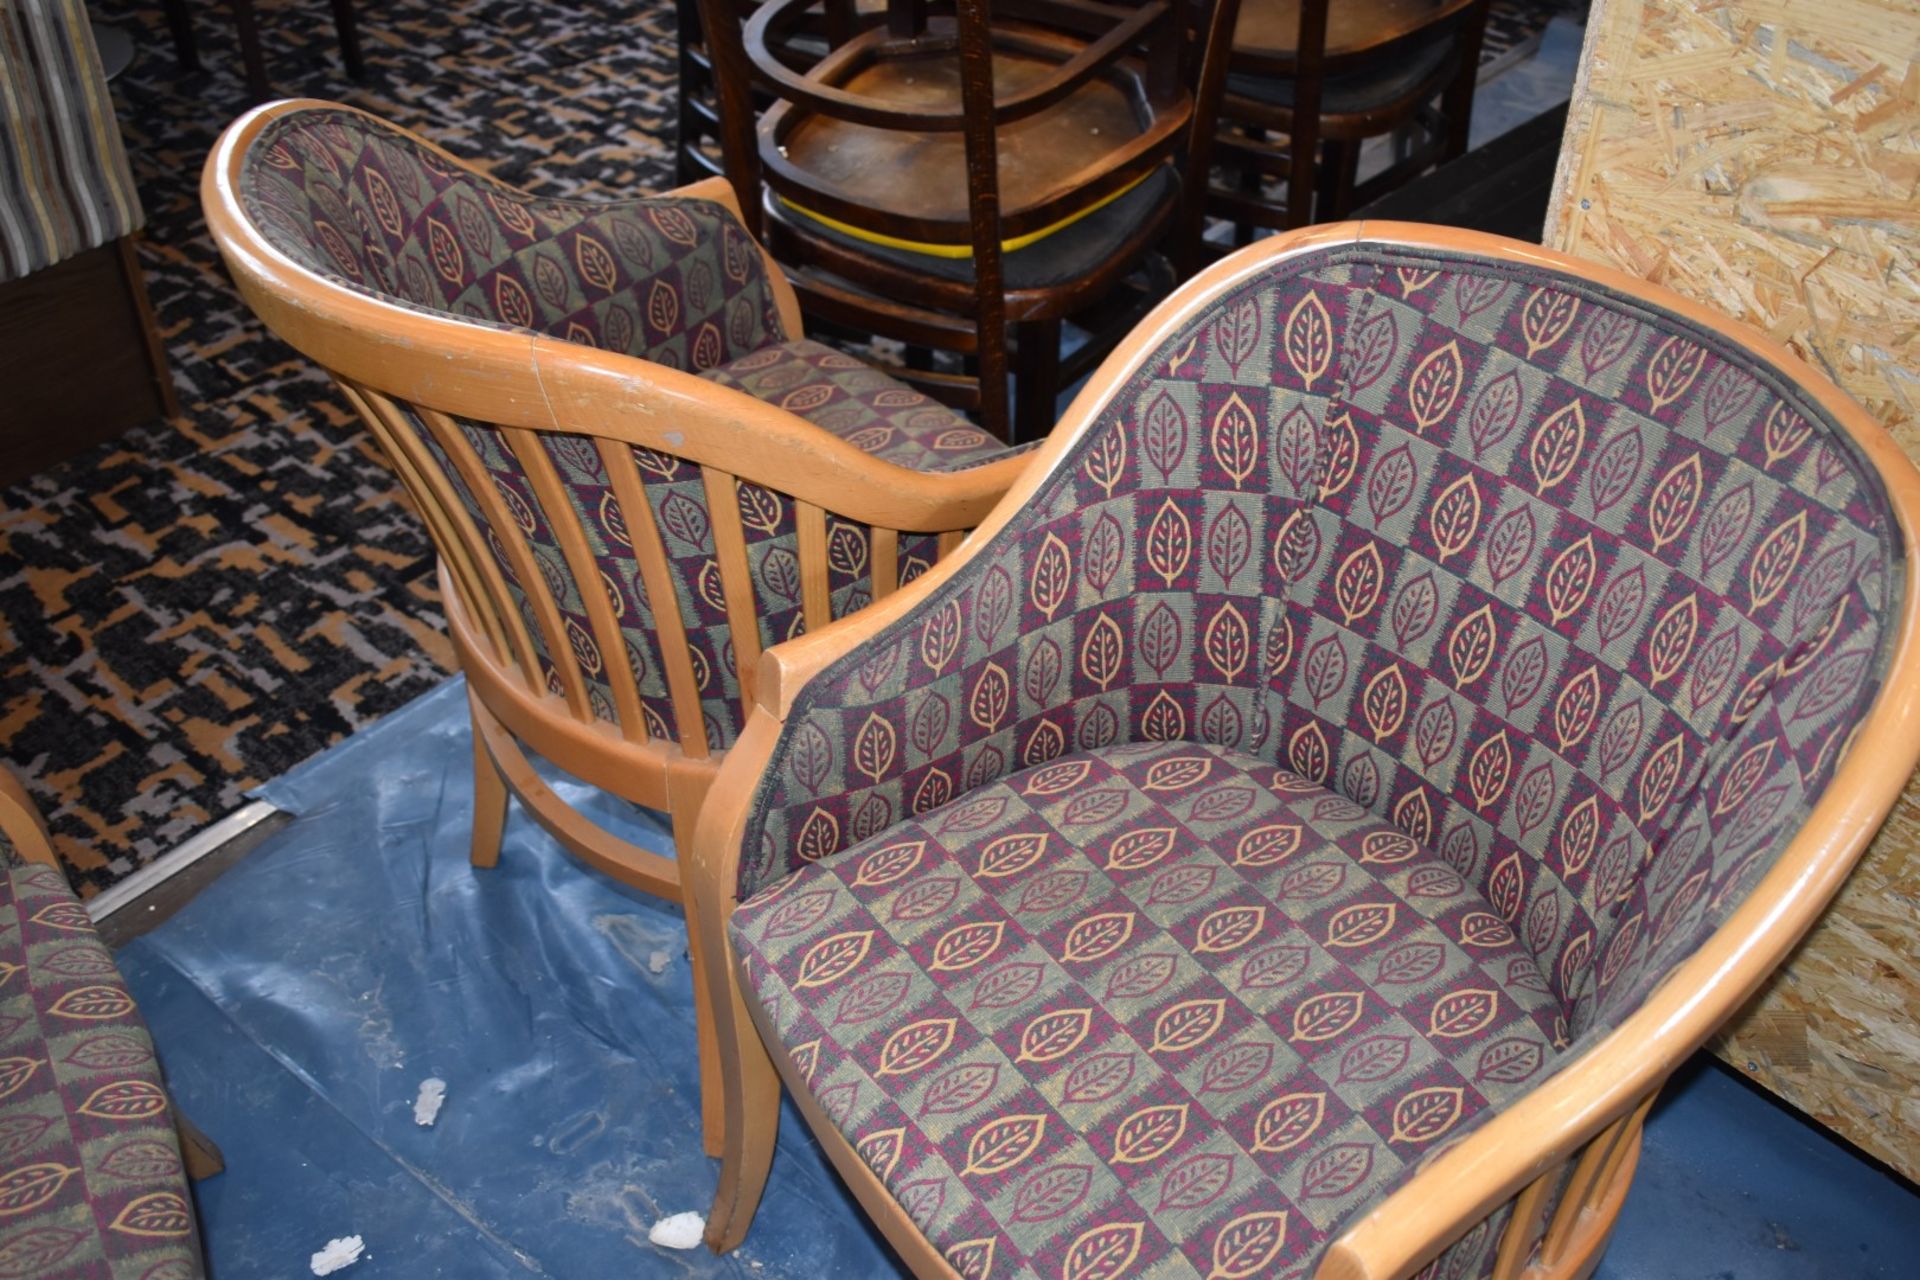 8 x Light Wooden Dining Tub Chairs With Leaf Design Upholstery - Ideal For Conservatories, Clubs, - Image 5 of 5